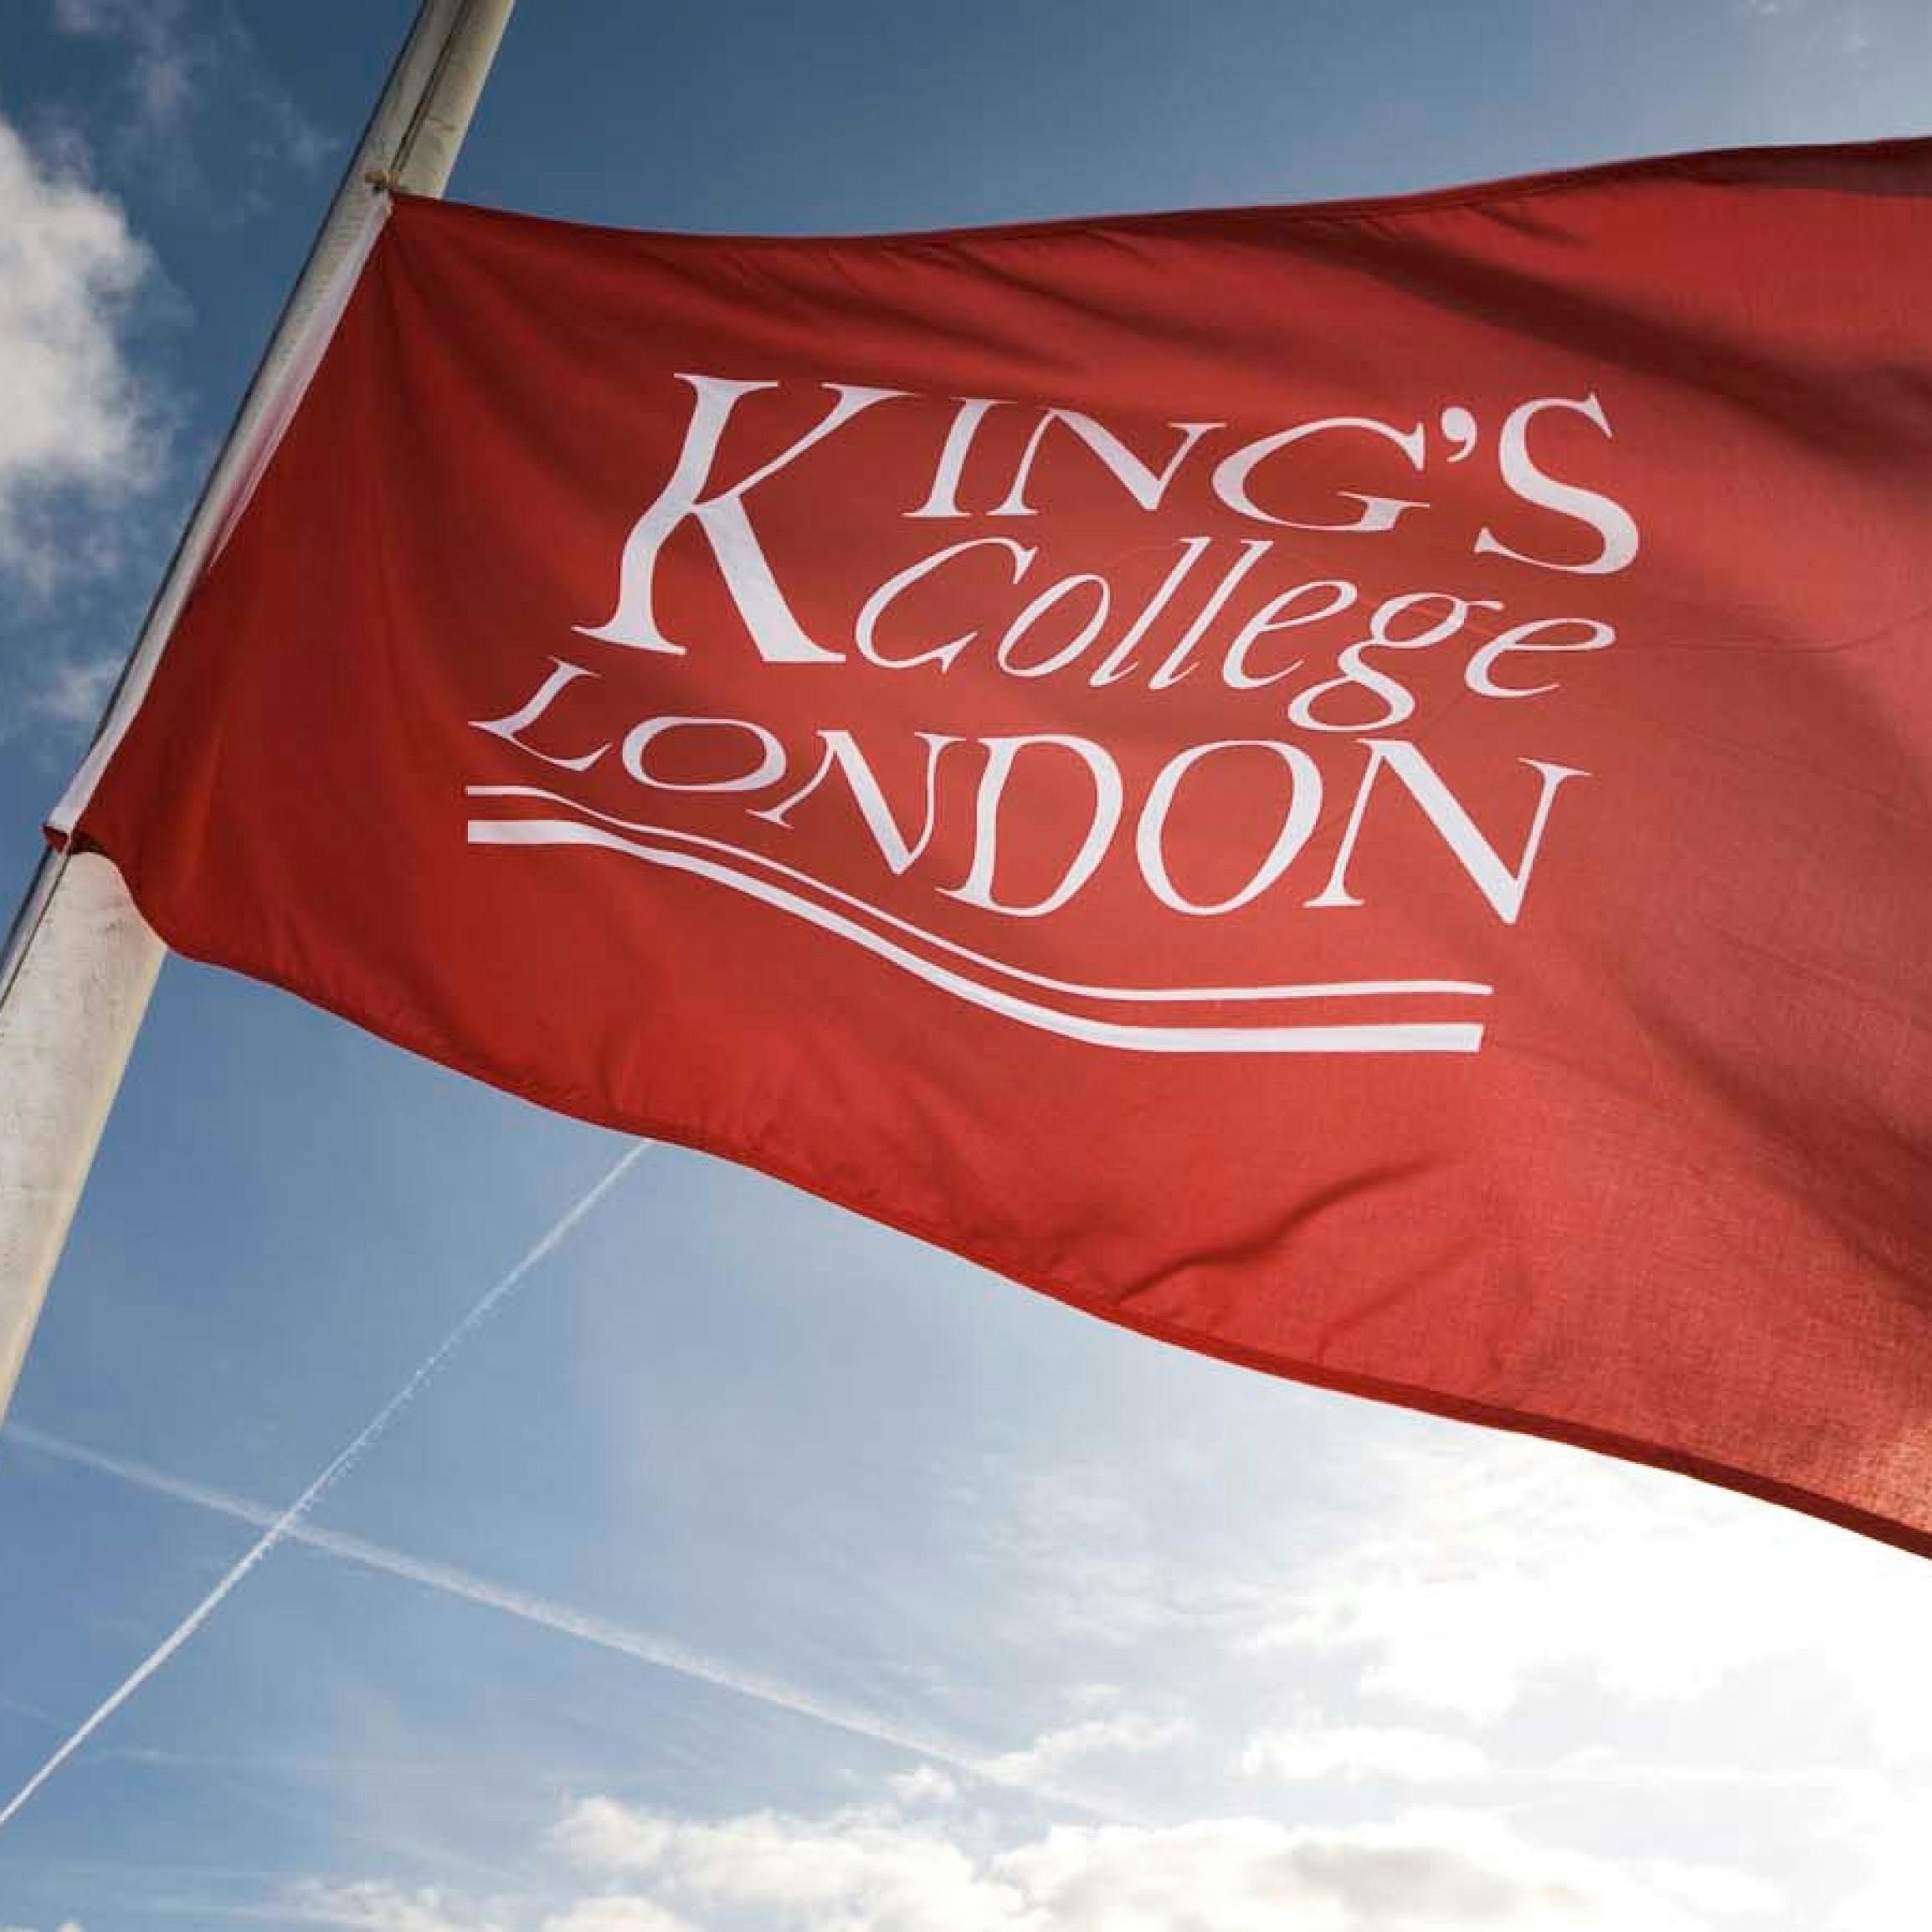 King's College London logo on a flag with a blue sky backdrop